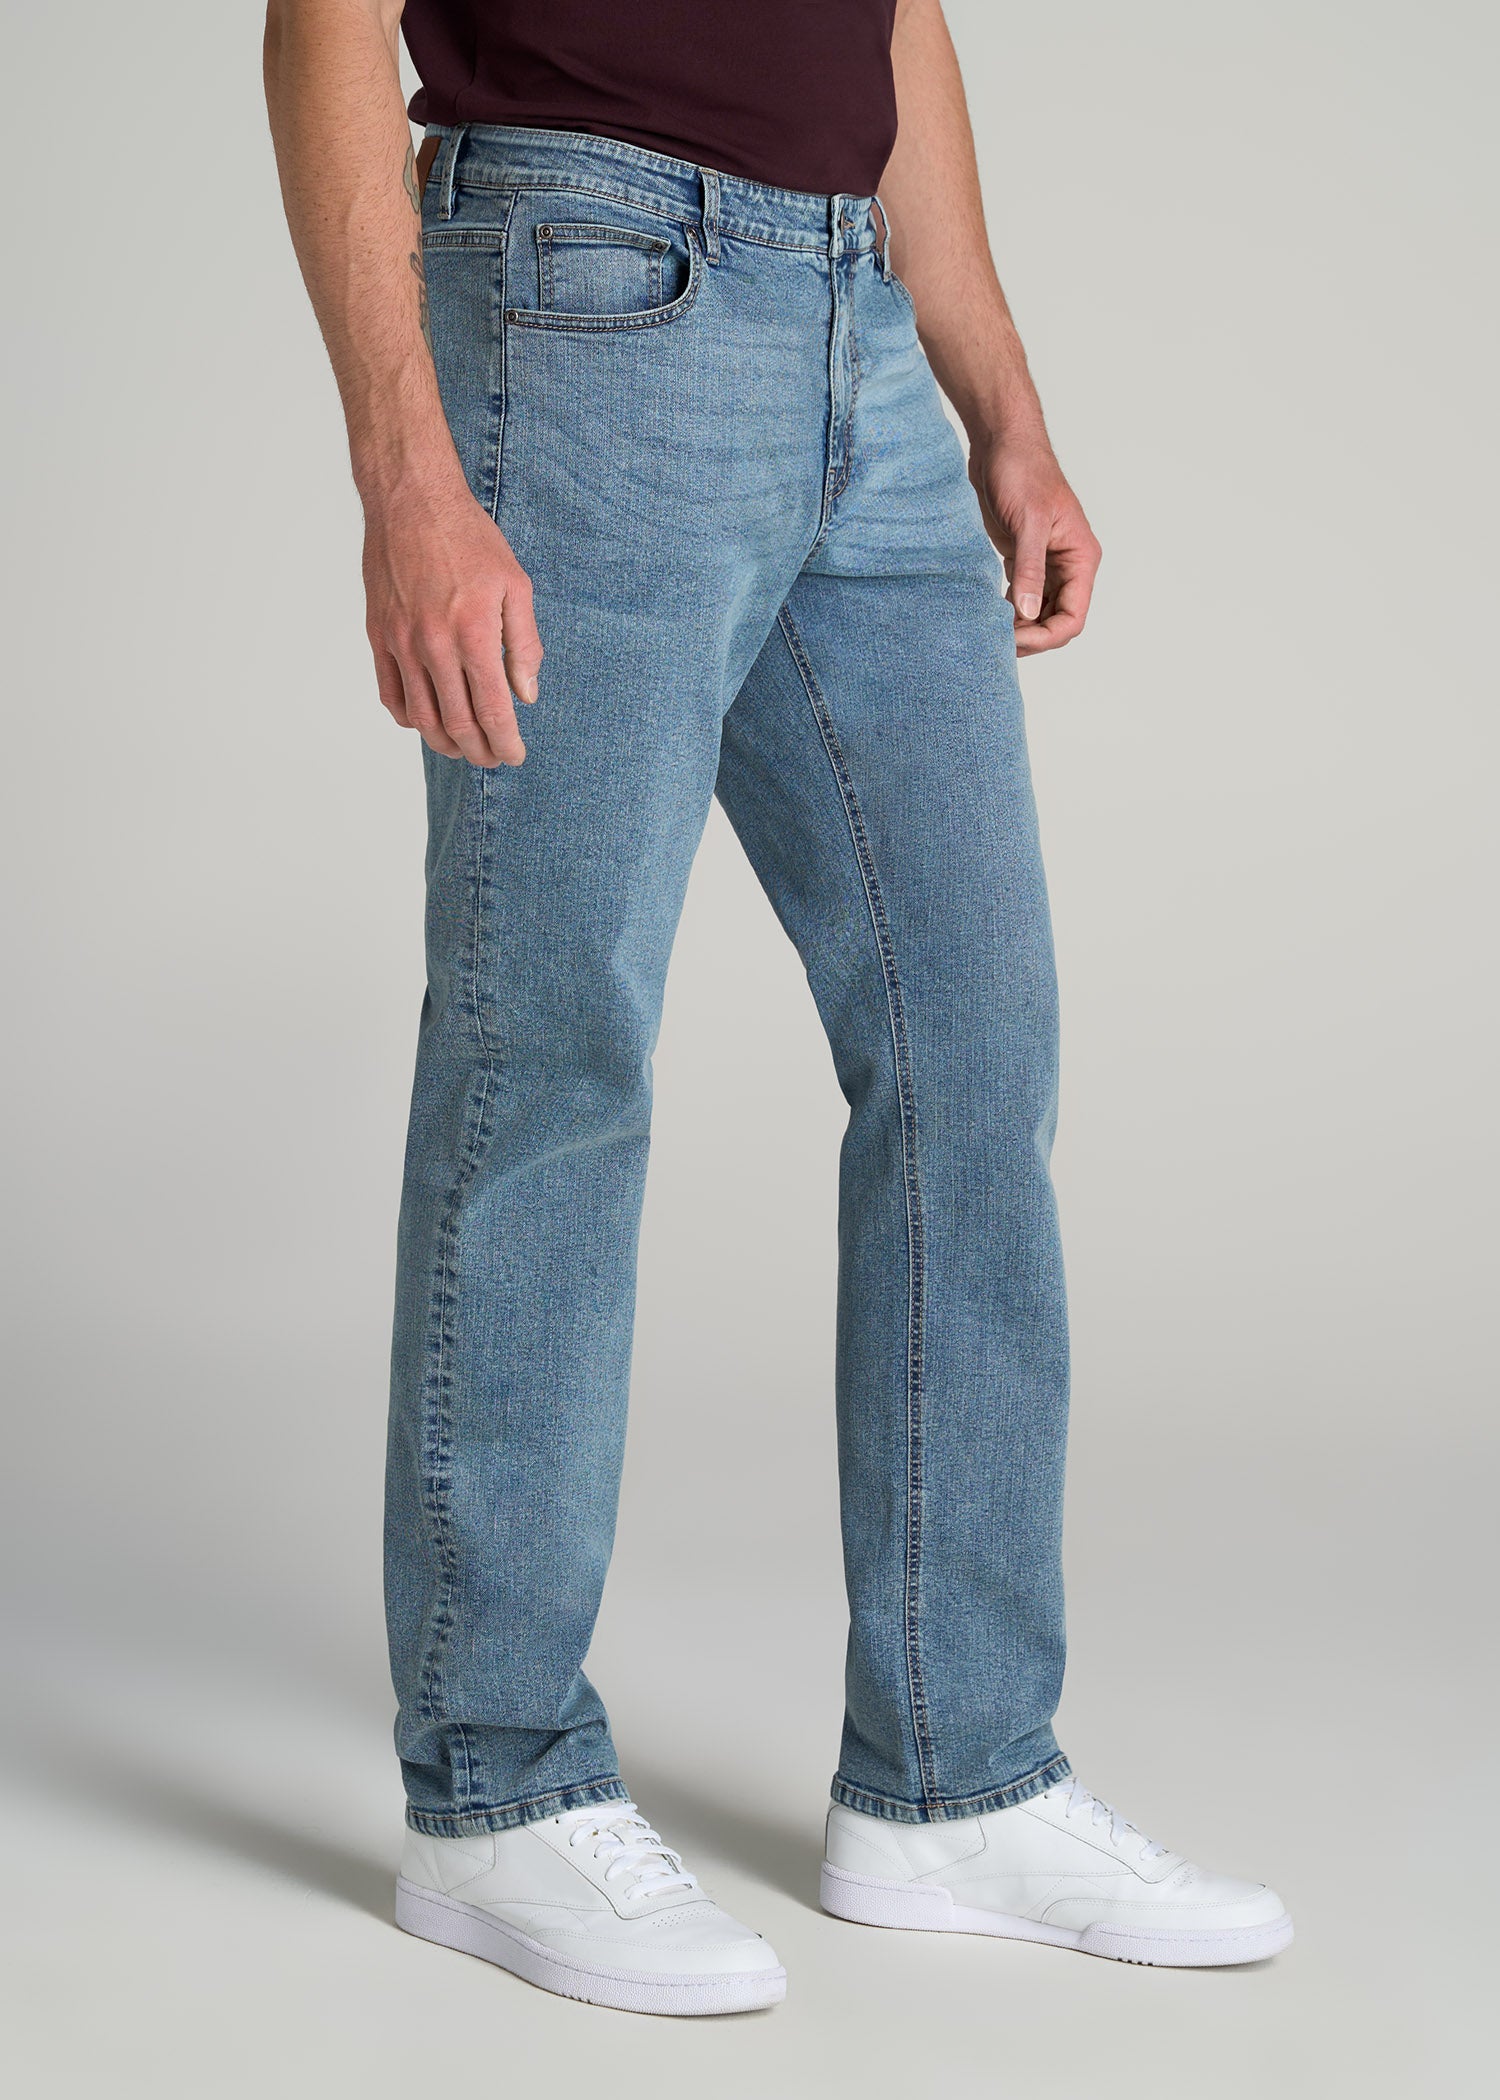 Mason SEMI-RELAXED Jeans for Tall Men in Vintage Faded Blue